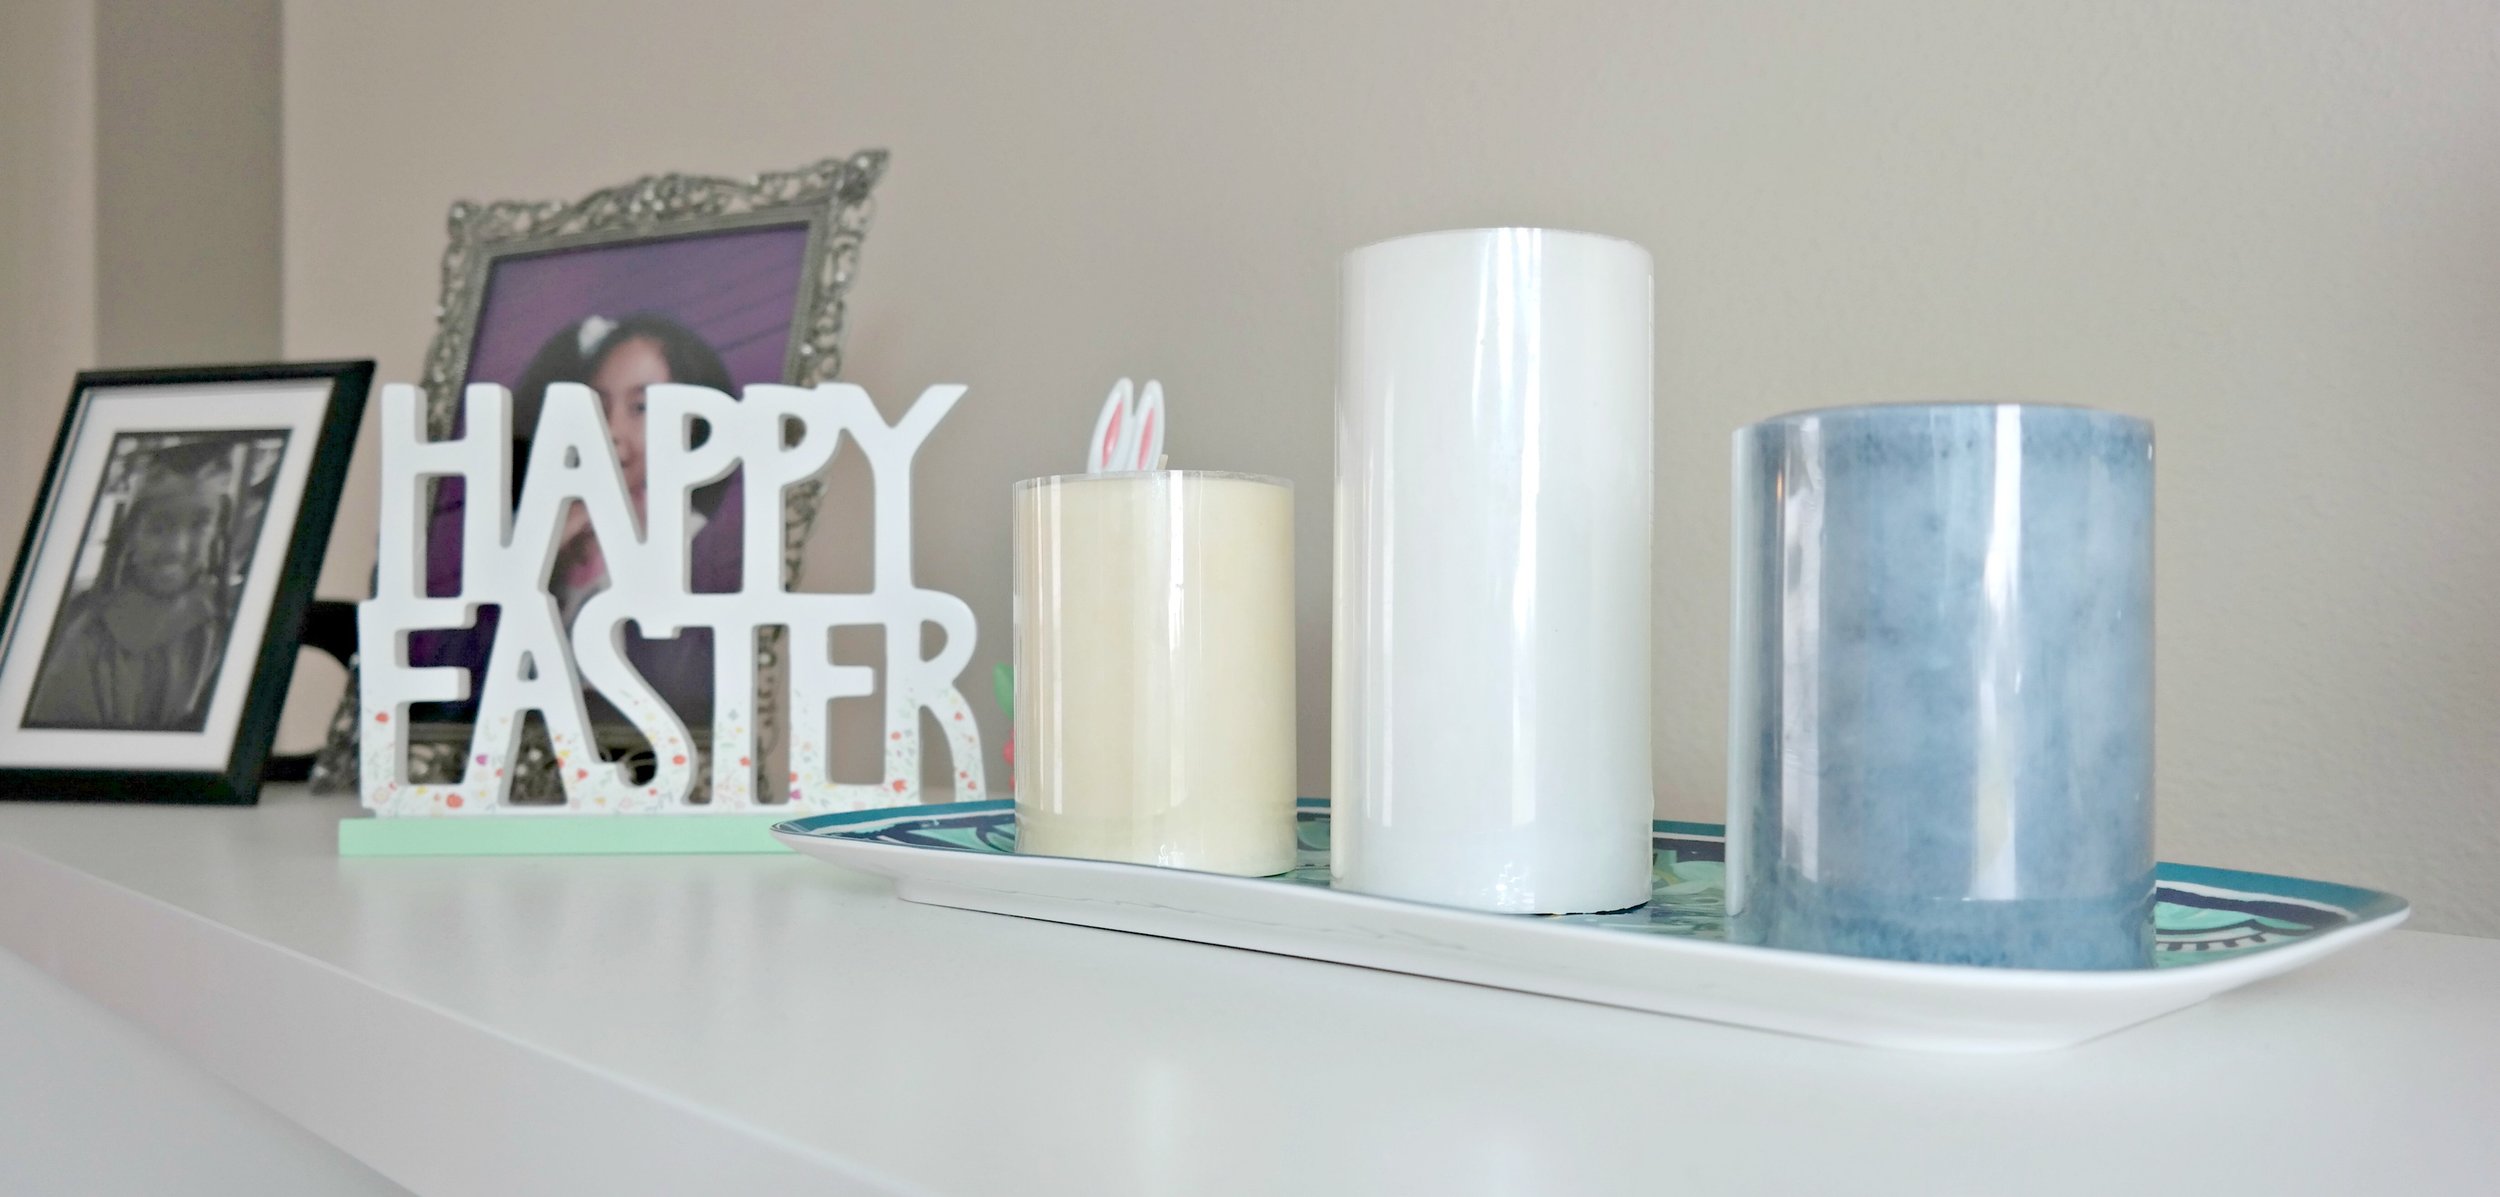 Candles and Easter sign for table or entertainment center.